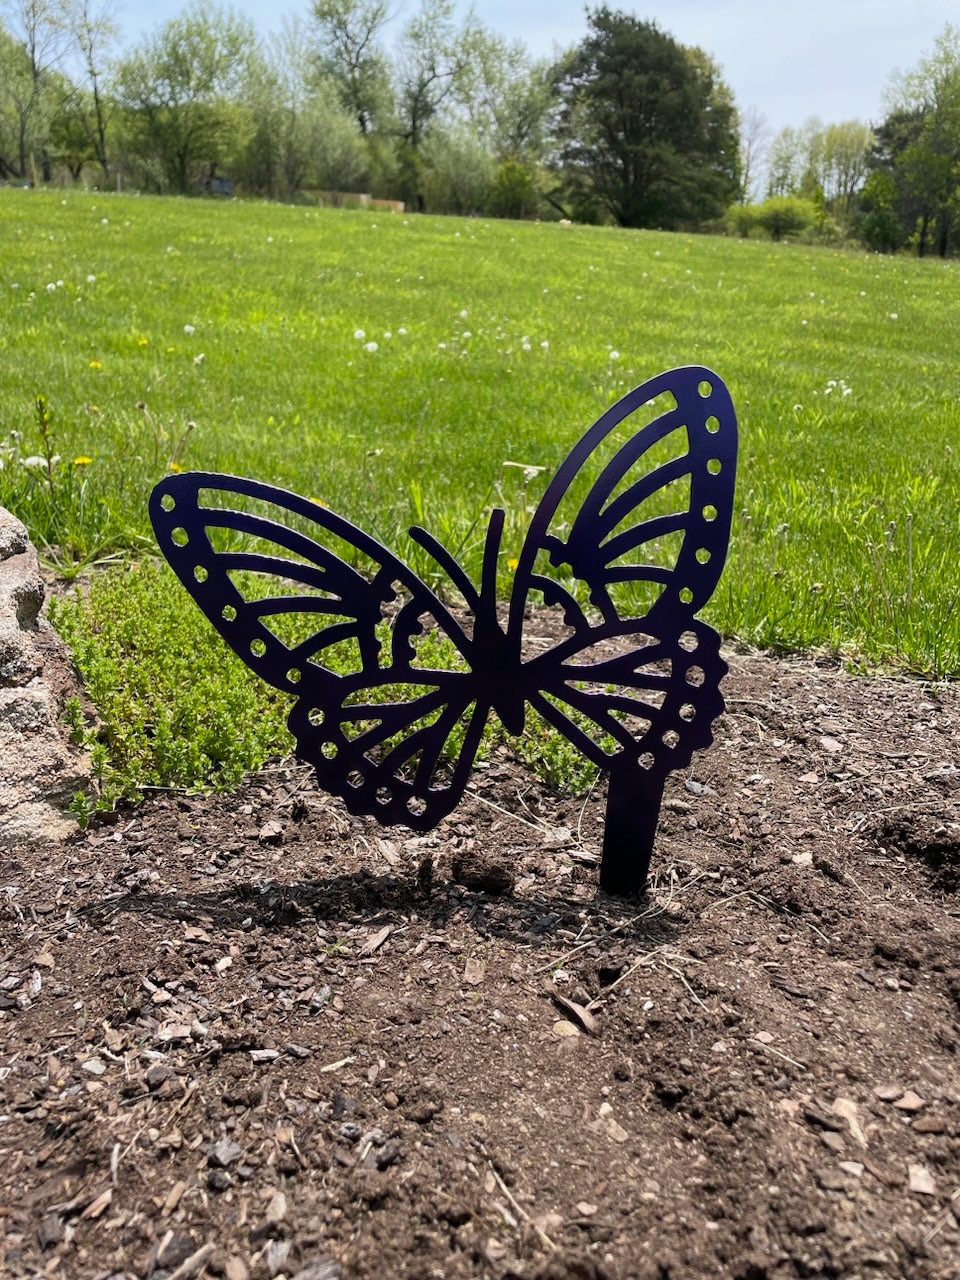 Painted Butterfly Garden Decor, Painted Metal Plant Stake Garden Decor -  Garden Plant Stick - 10 x 12